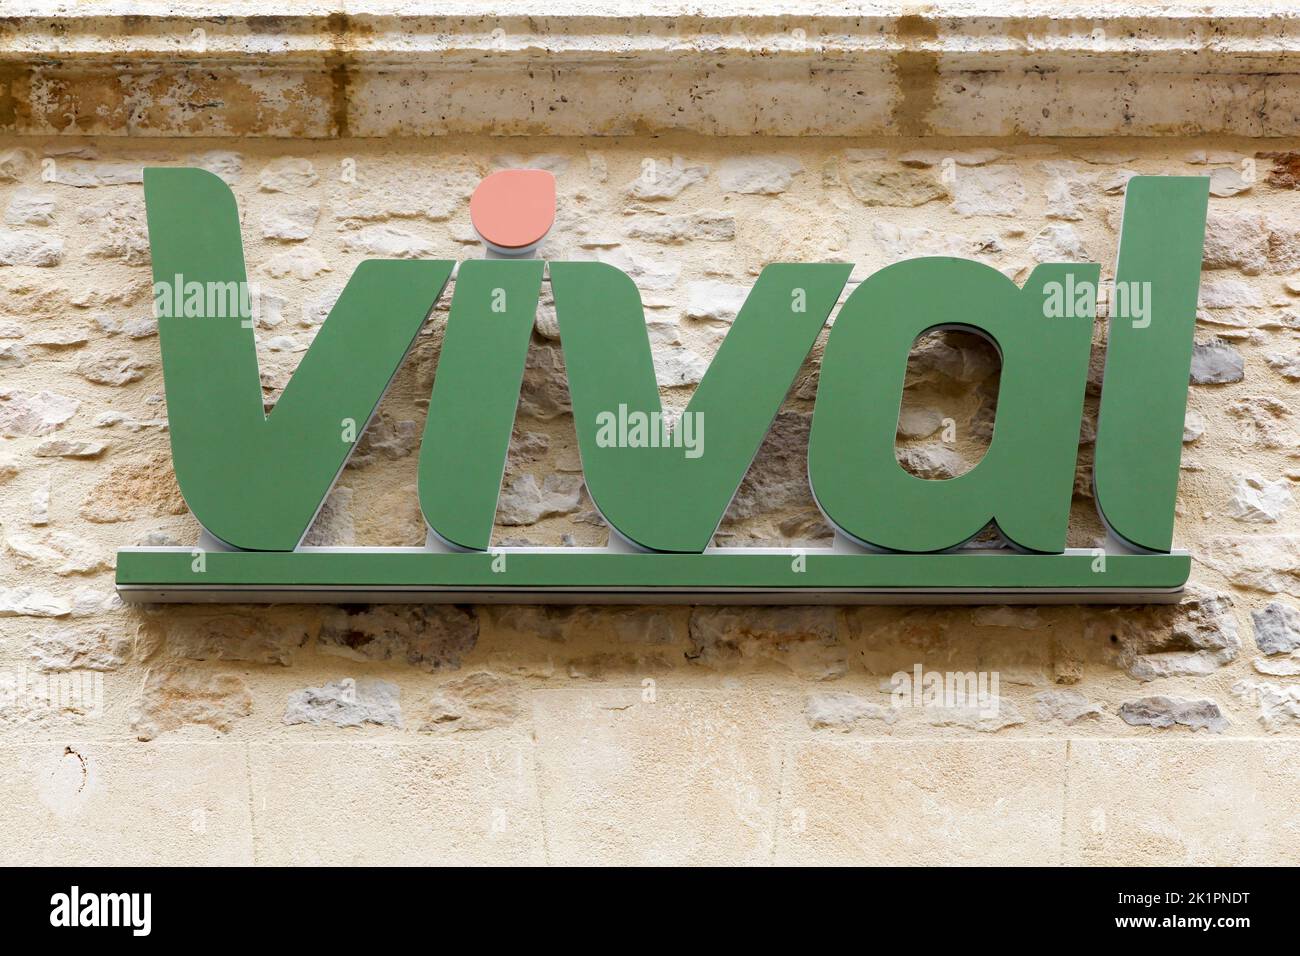 Villefranche du Perigord, France - June 26, 2021: Vival logo on a wall. Vival is a French convenience store belonging to the Casino Group Stock Photo